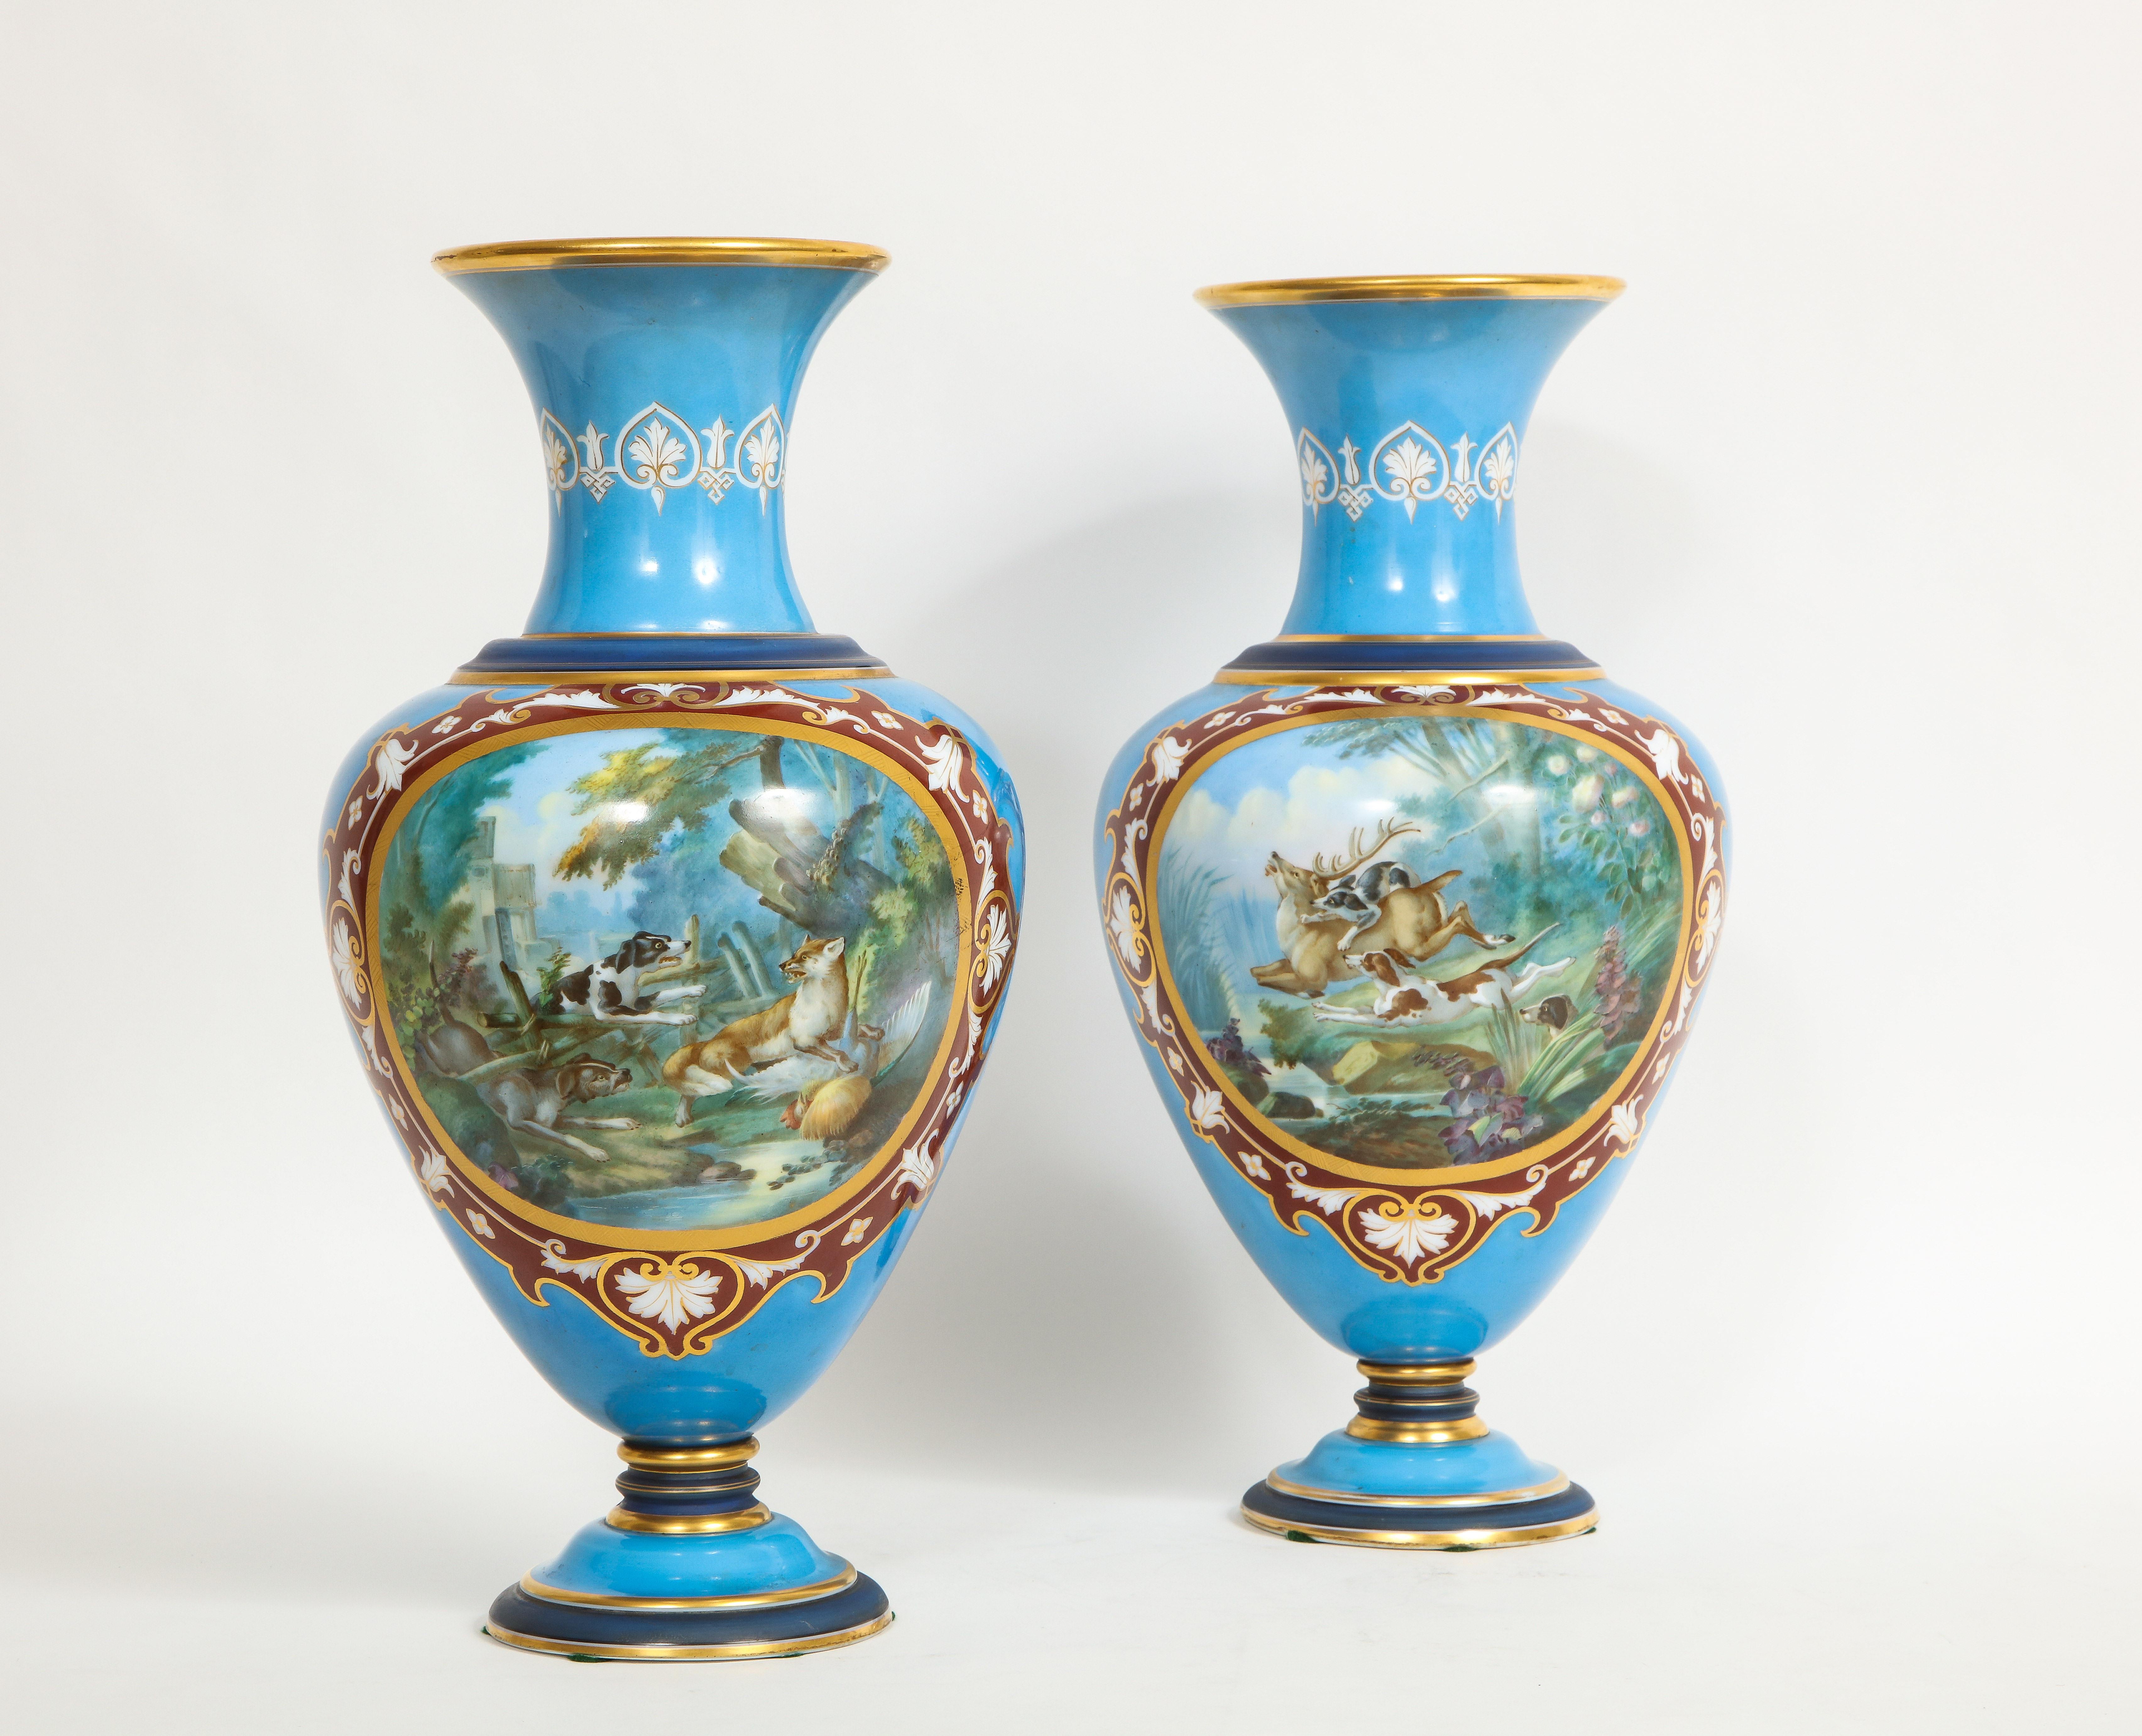 Crystal 19th Century French Pair of Baccarat Enameled Opaline Vases with Hunting Scenes For Sale